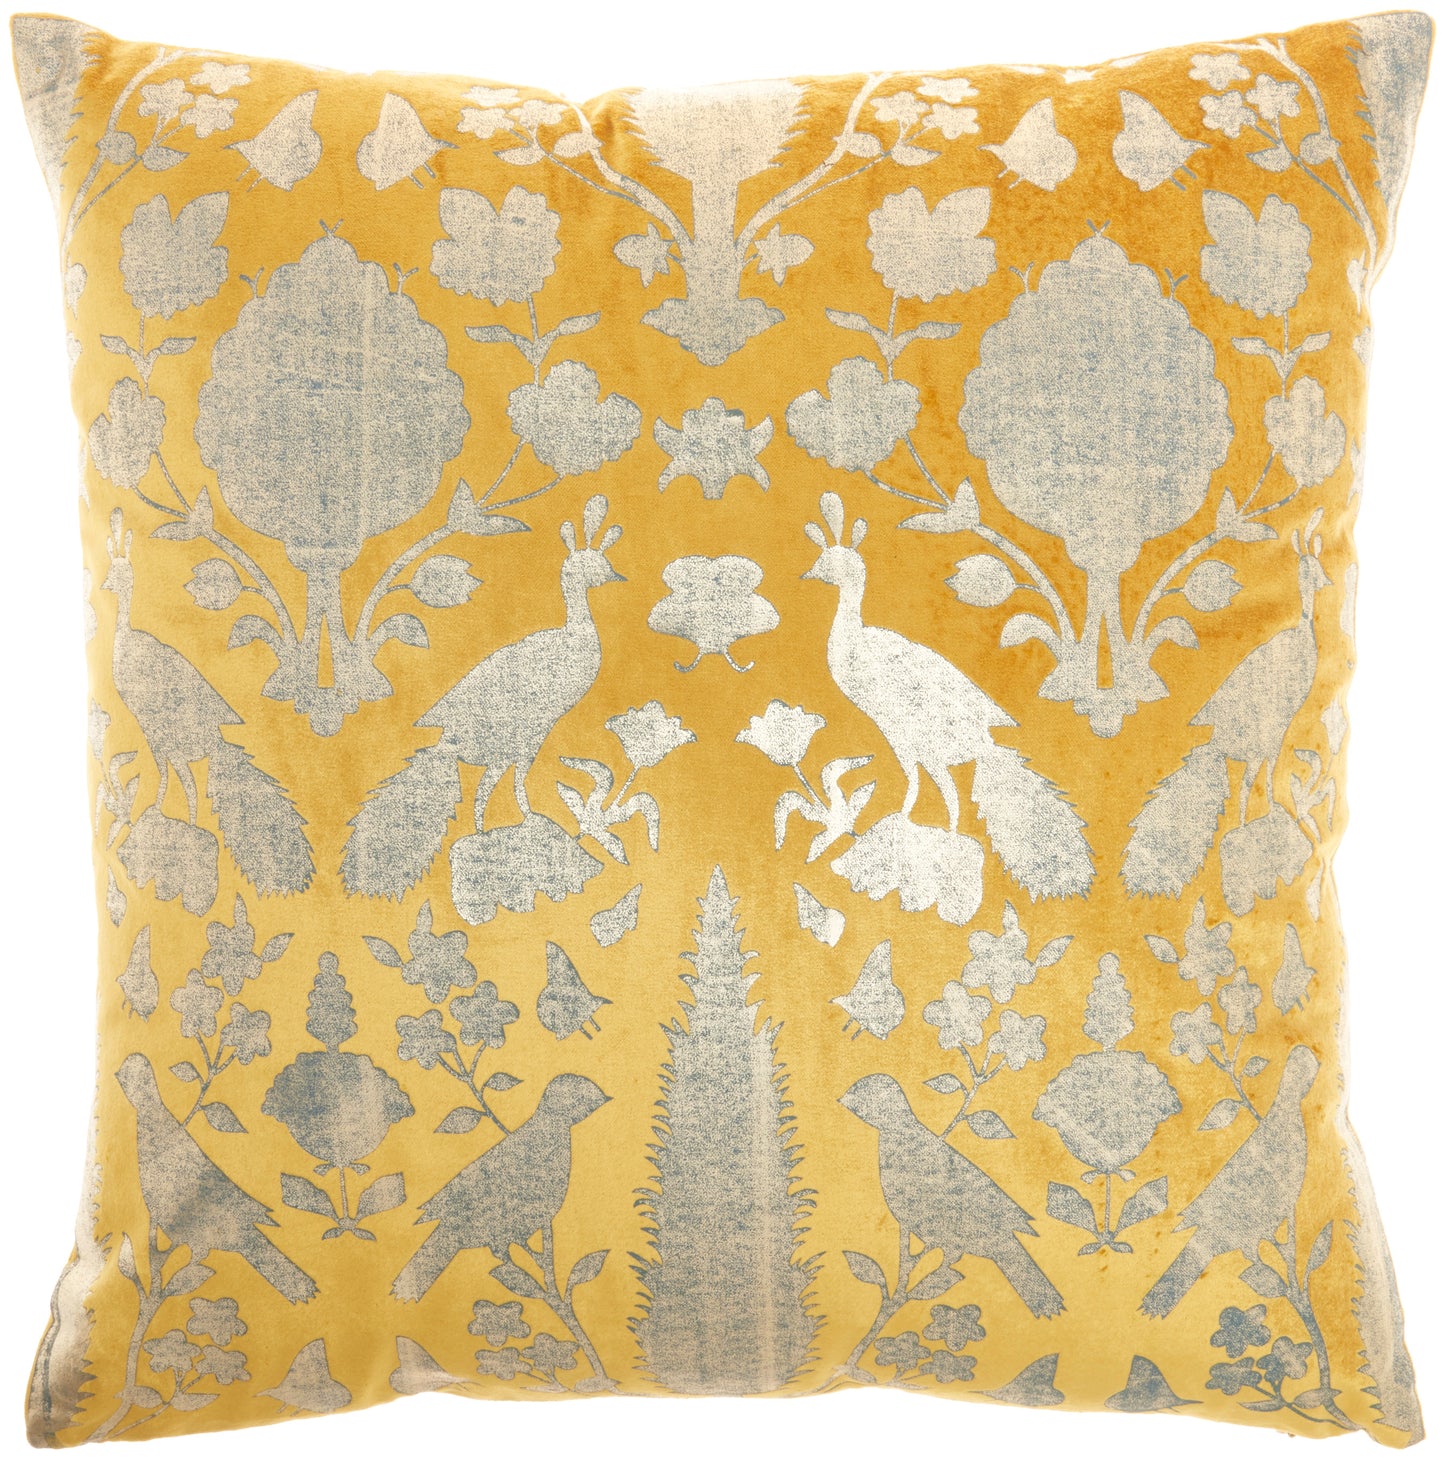 Sofia AC384 Velvet Foil Print Birds Throw Pillow From Mina Victory By Nourison Rugs